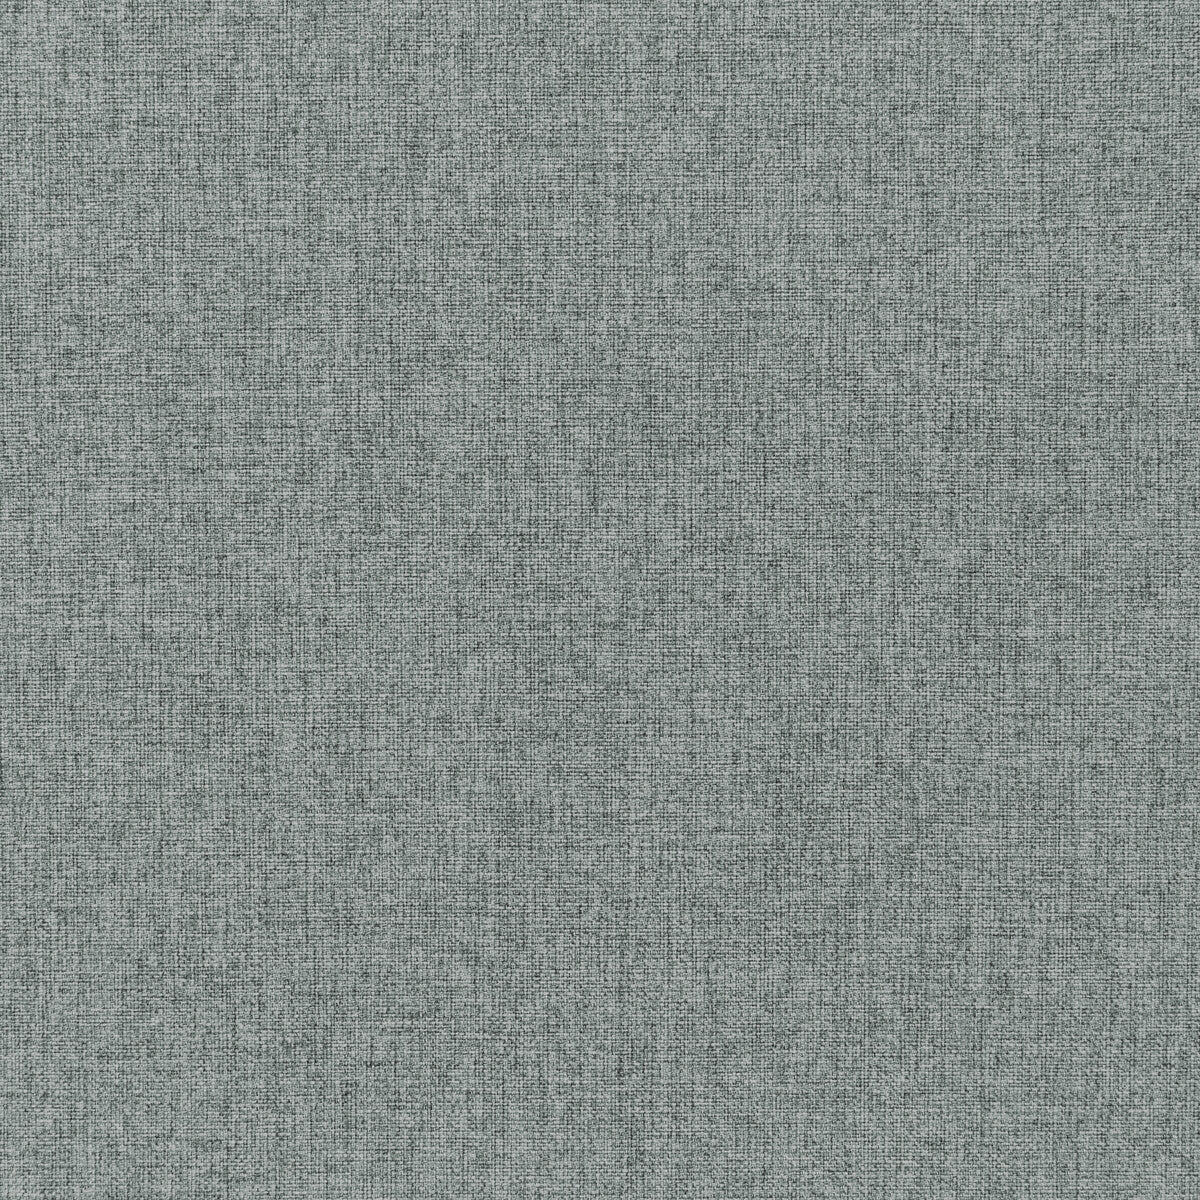 Fortify fabric in slate color - pattern 36257.52.0 - by Kravet Contract in the Supreen collection